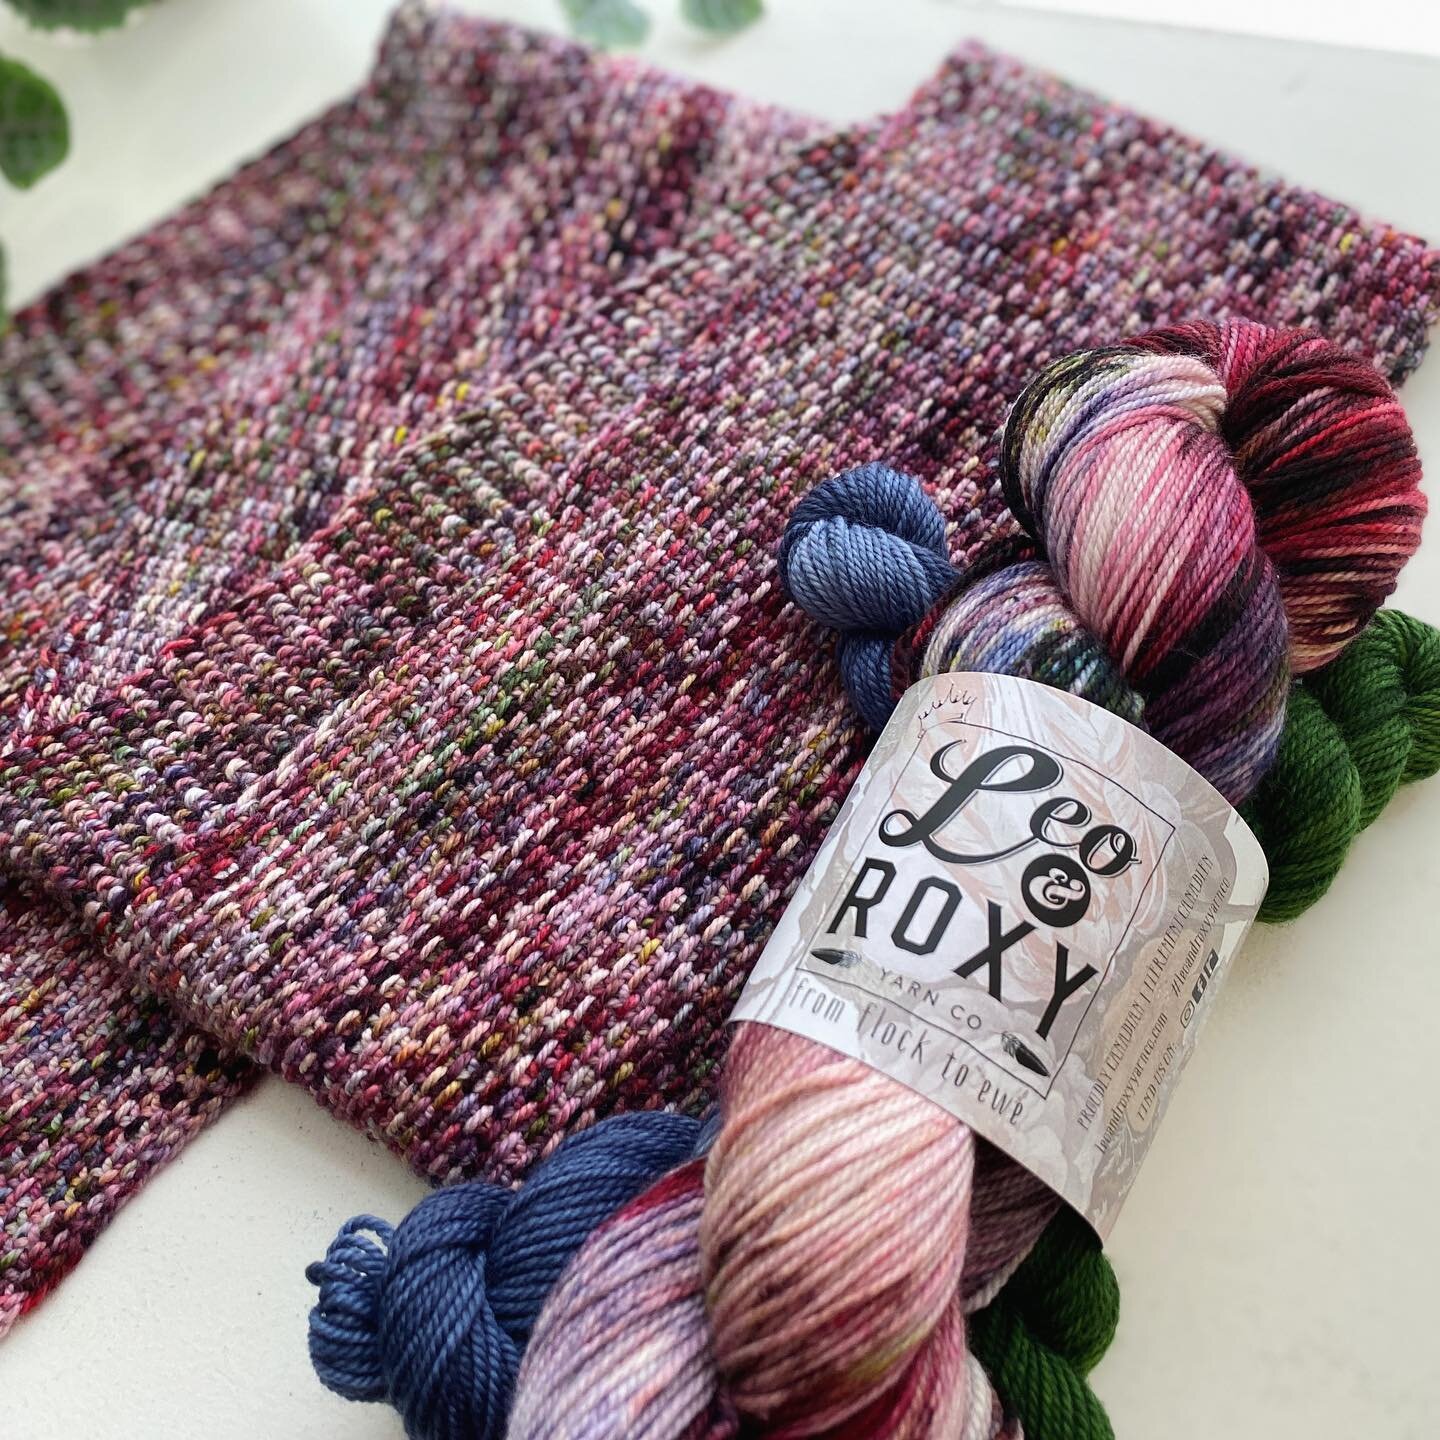 A custom colour for @little.red.mitten called LRM Wallpaper. Paired with Morning Glory and Spruce minis in this sock set. Available on at the Little Red Mitten. 

#leoandroxyyarnco #colourfulyarn #brightyarn #indiedyer #handdyedyarn #indiedyersofinst